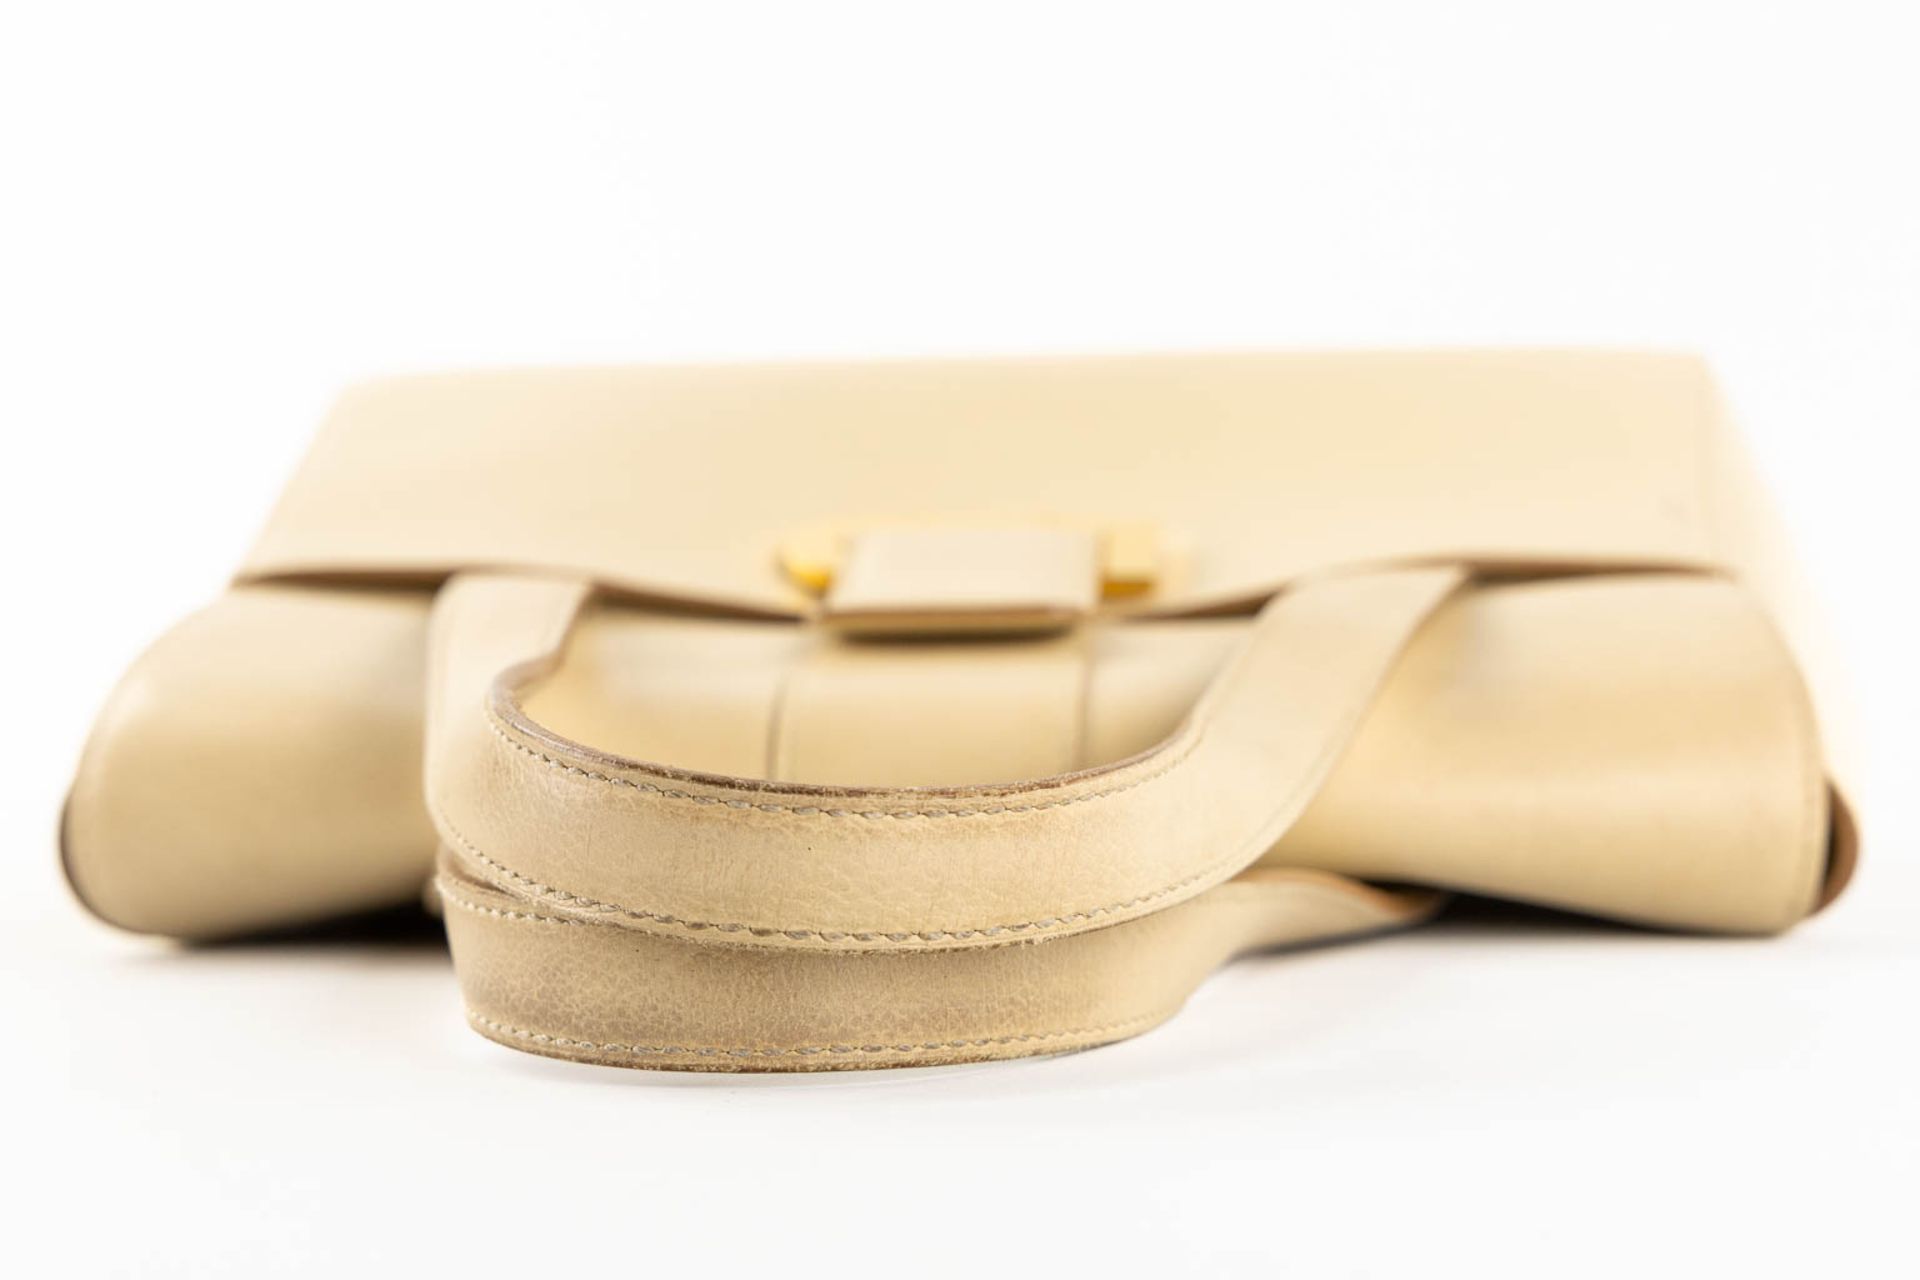 Delvaux model 'Reverie' Jumping, Ivoire. Ivory coloured leather. (L:11 x W:28 x H:23 cm) - Image 9 of 20